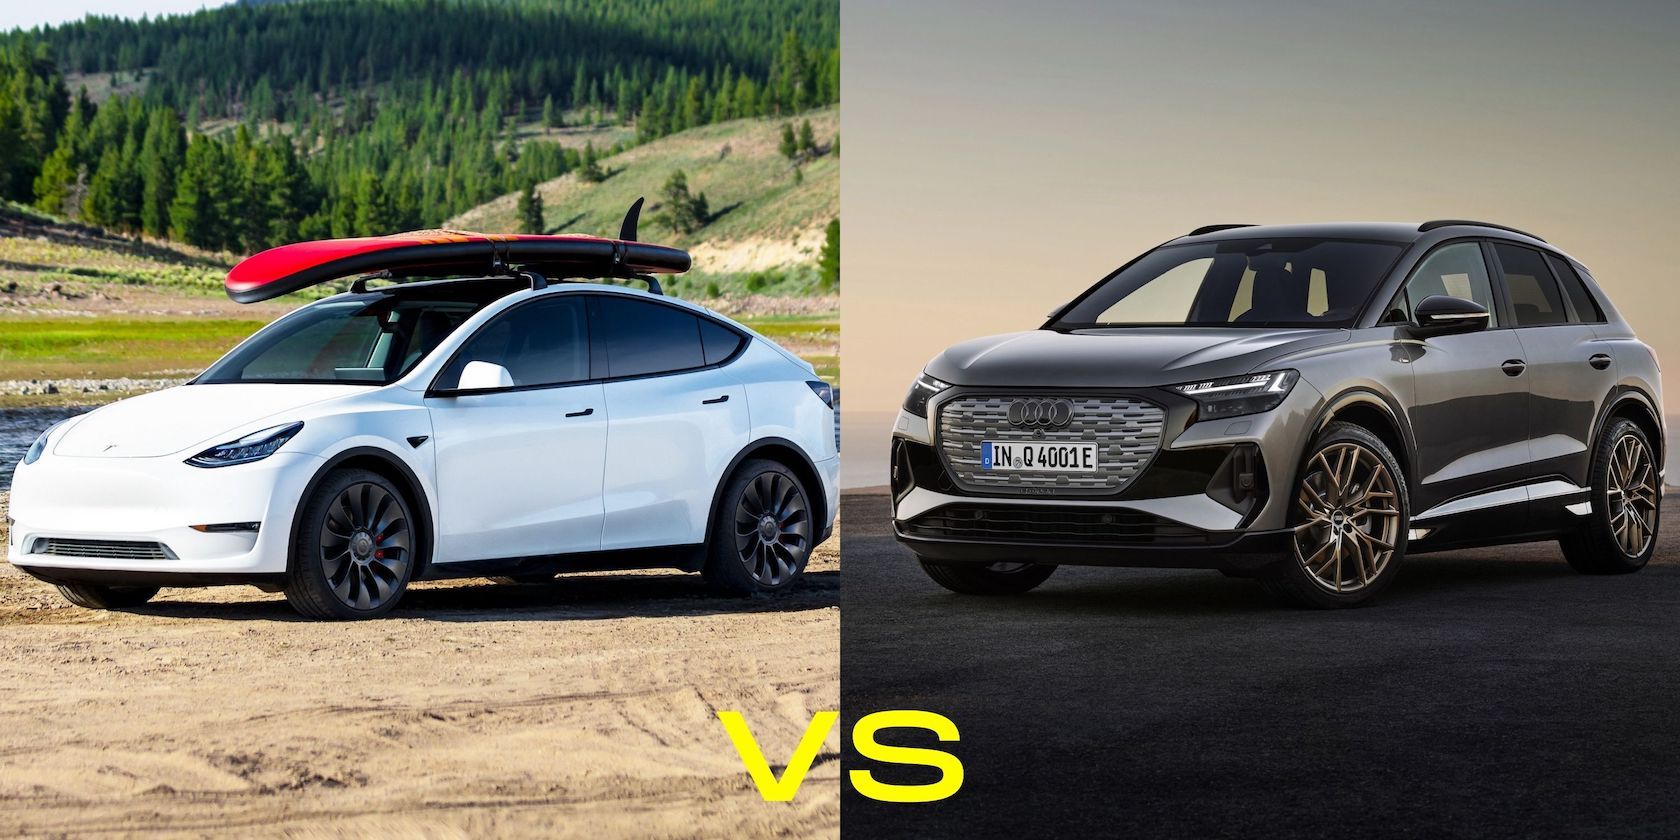 Tesla Model Y (with a surfboard on its roof) side by side with a grey Audi Q4 e-tron